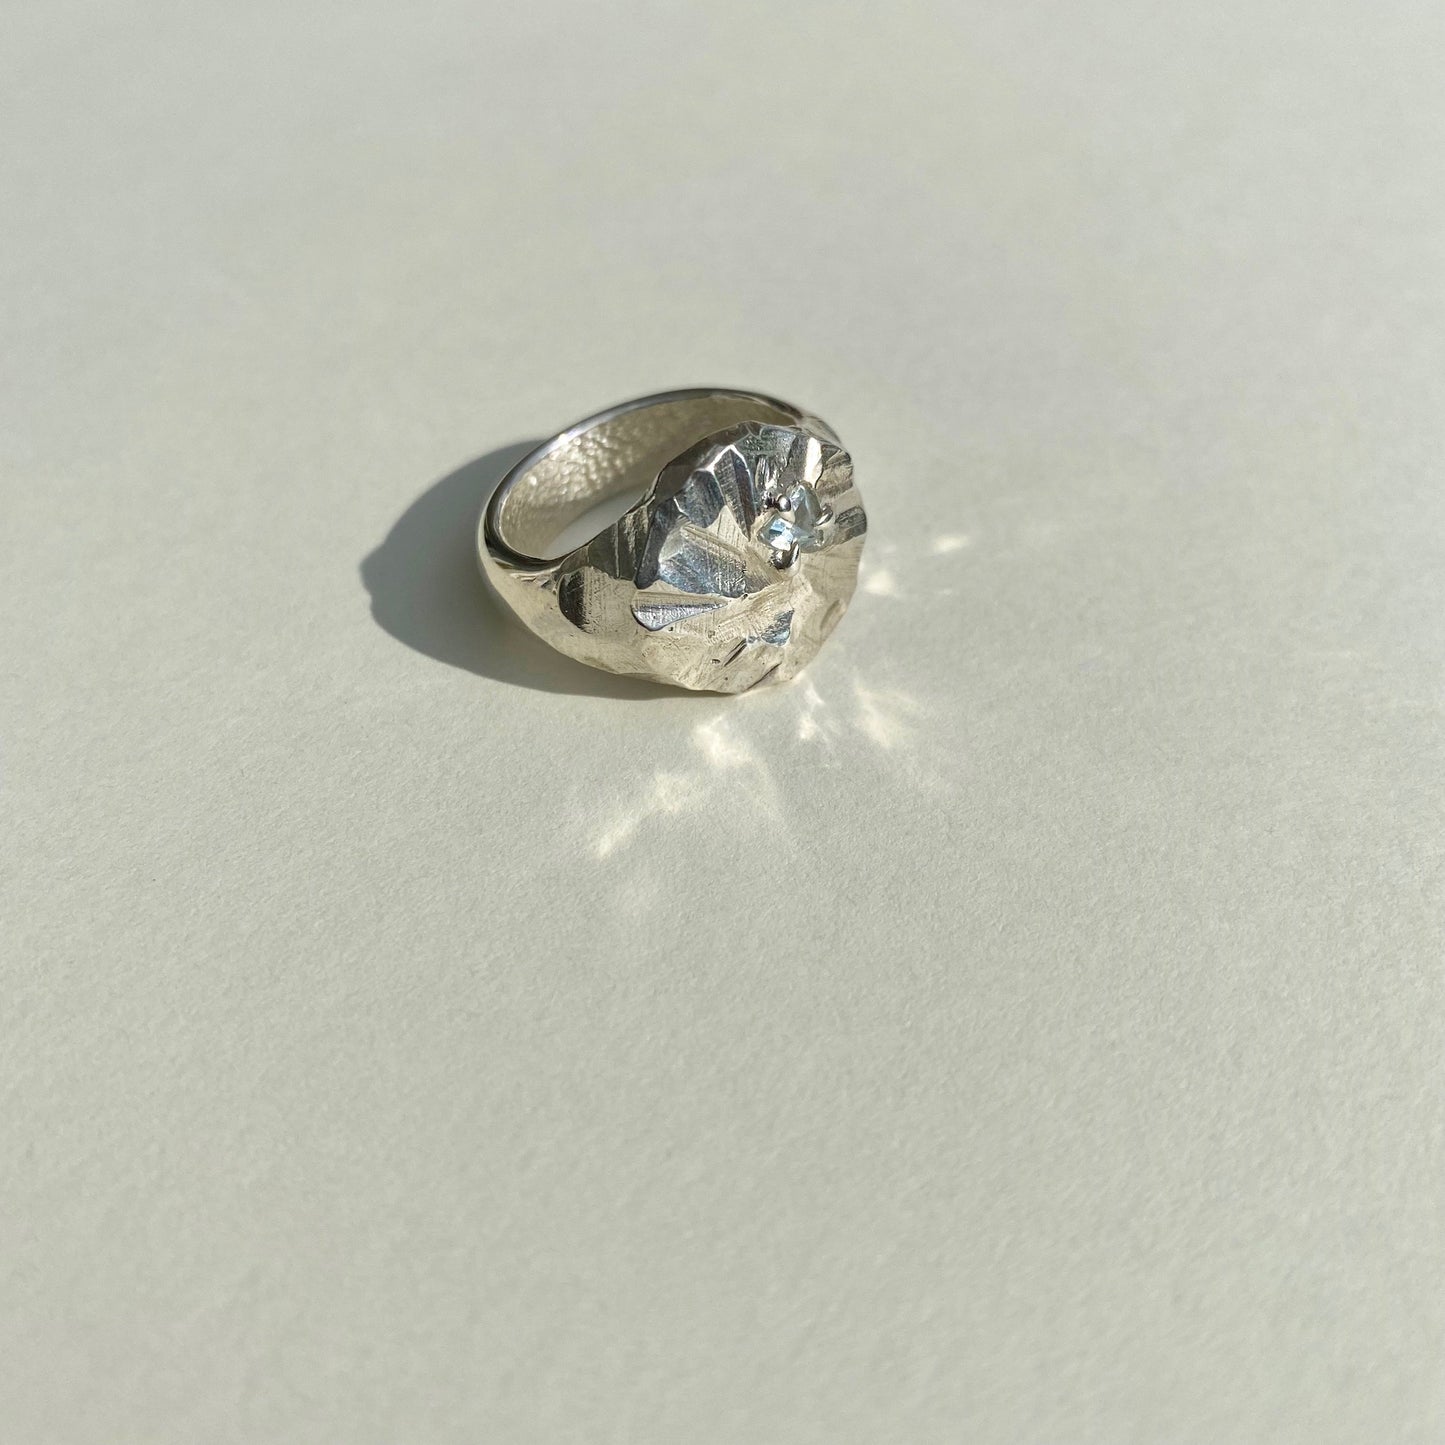 SILEX sterling silver and Aquamarine ring I